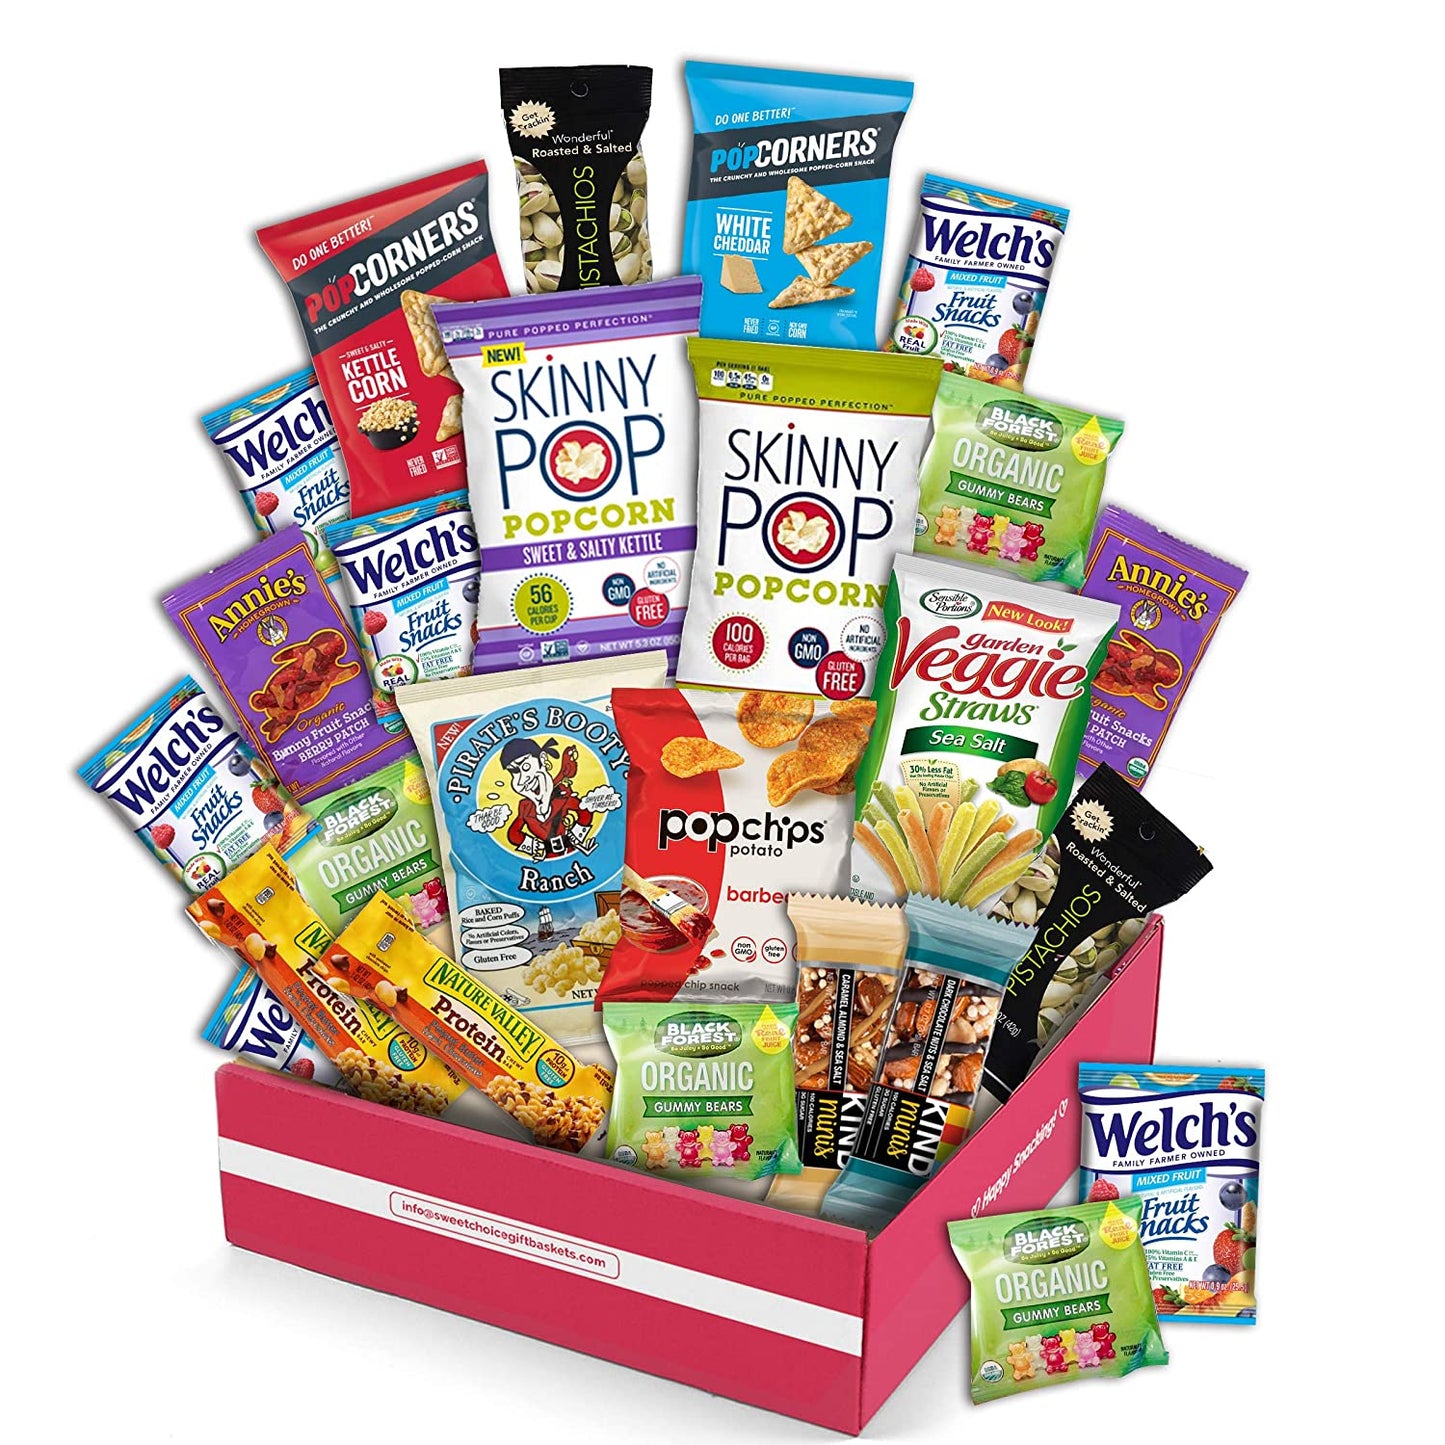 Snack Box Gluten Free Healthy Snacks Care Package (20 Count) for College Students, Exams, Father's Day, Mothers Day,Military, Finals, Office and Gift Ideas. Chips, Popcorn, and granola Bars.